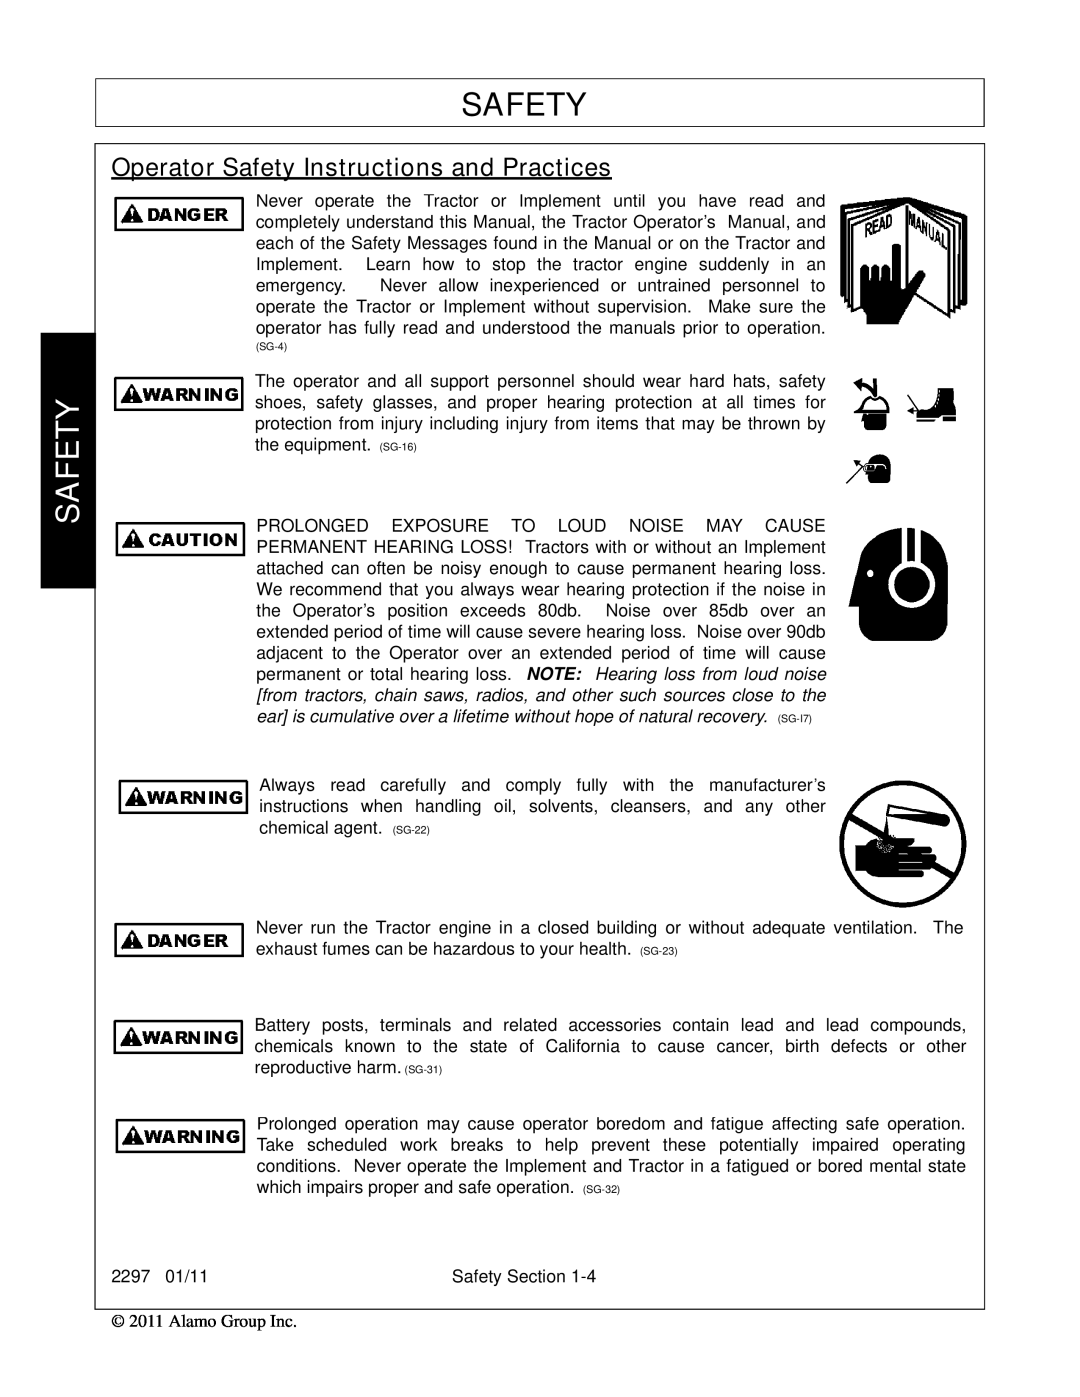 Bush Hog 2297 manual Operator Safety Instructions and Practices, SG-4 